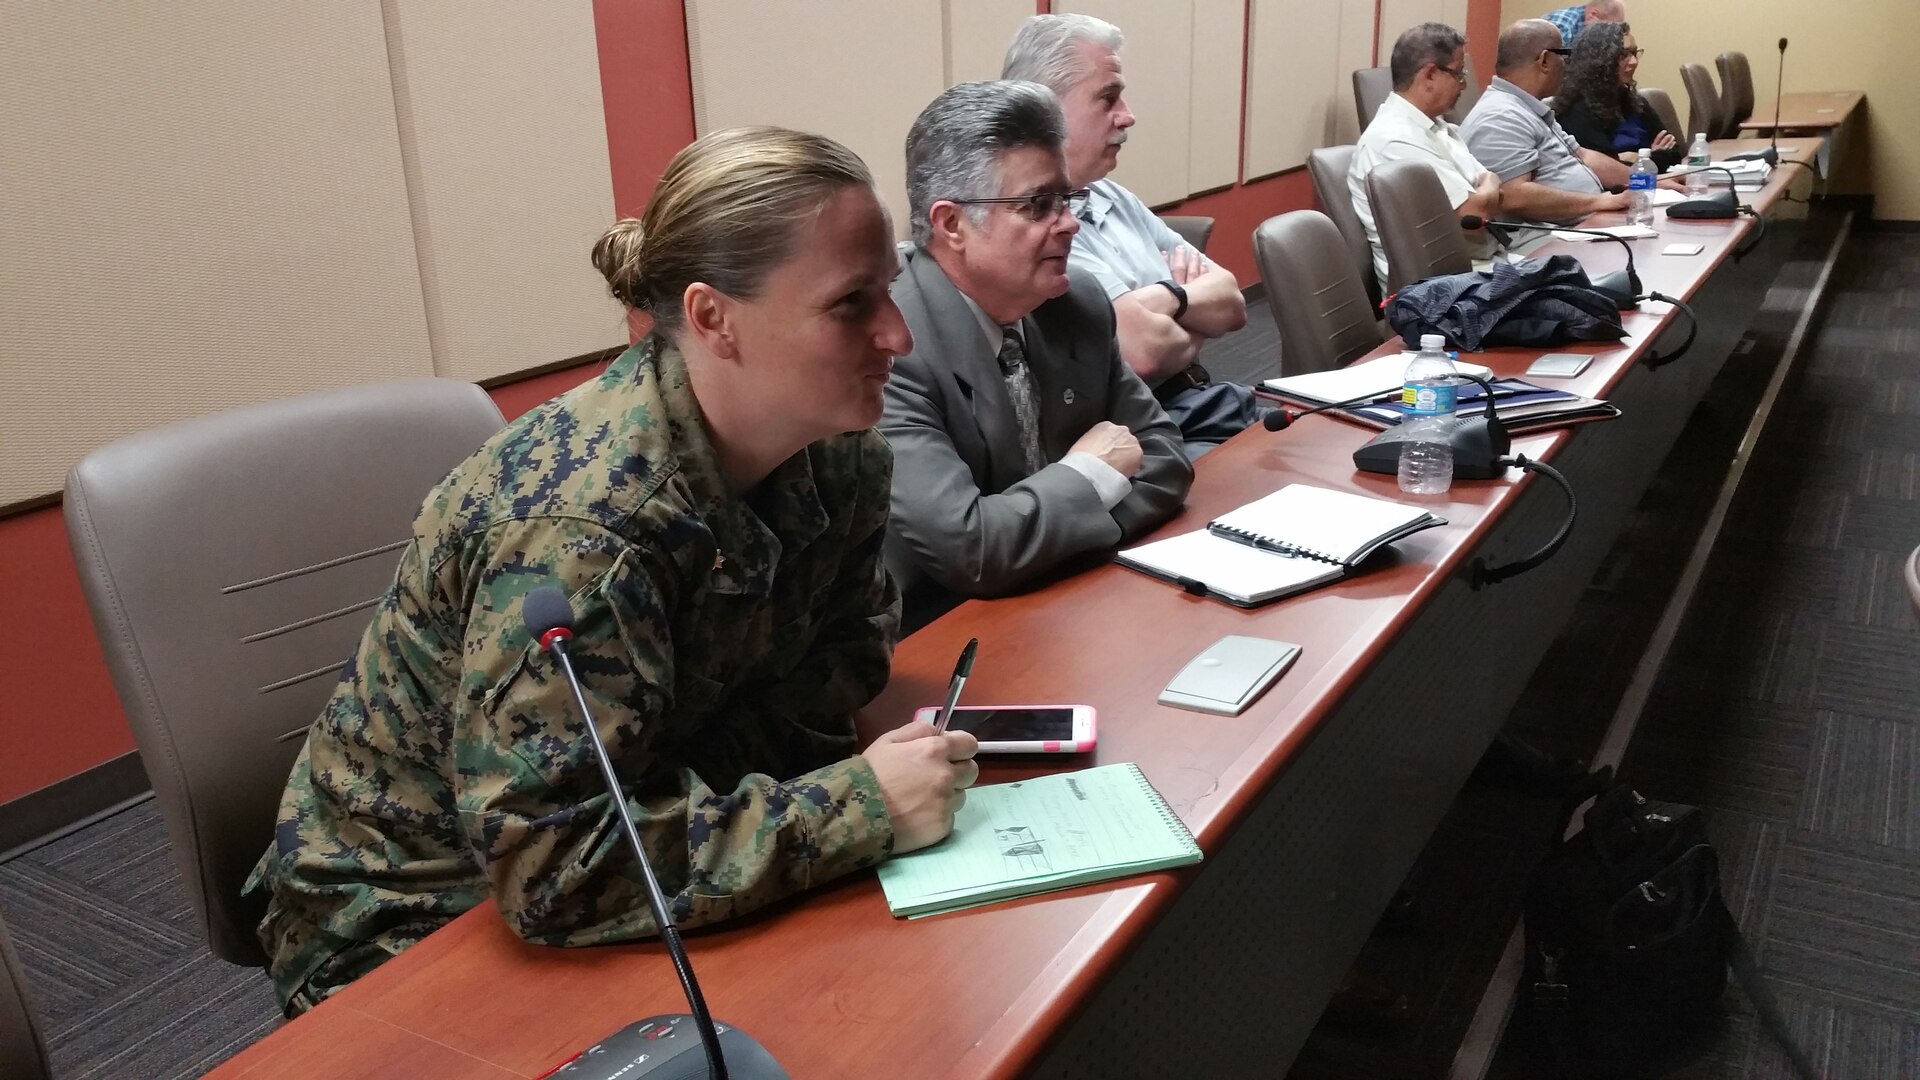 From left: Marine Corps Reserve Maj. Jamie Fleischhacker and Rogelio (Roy) Diaz, DLA liaison officer for USSOUTHCOM take part in the final planning conference for Integrated Advance 17 exercise at U.S. Southern Command headquarters.